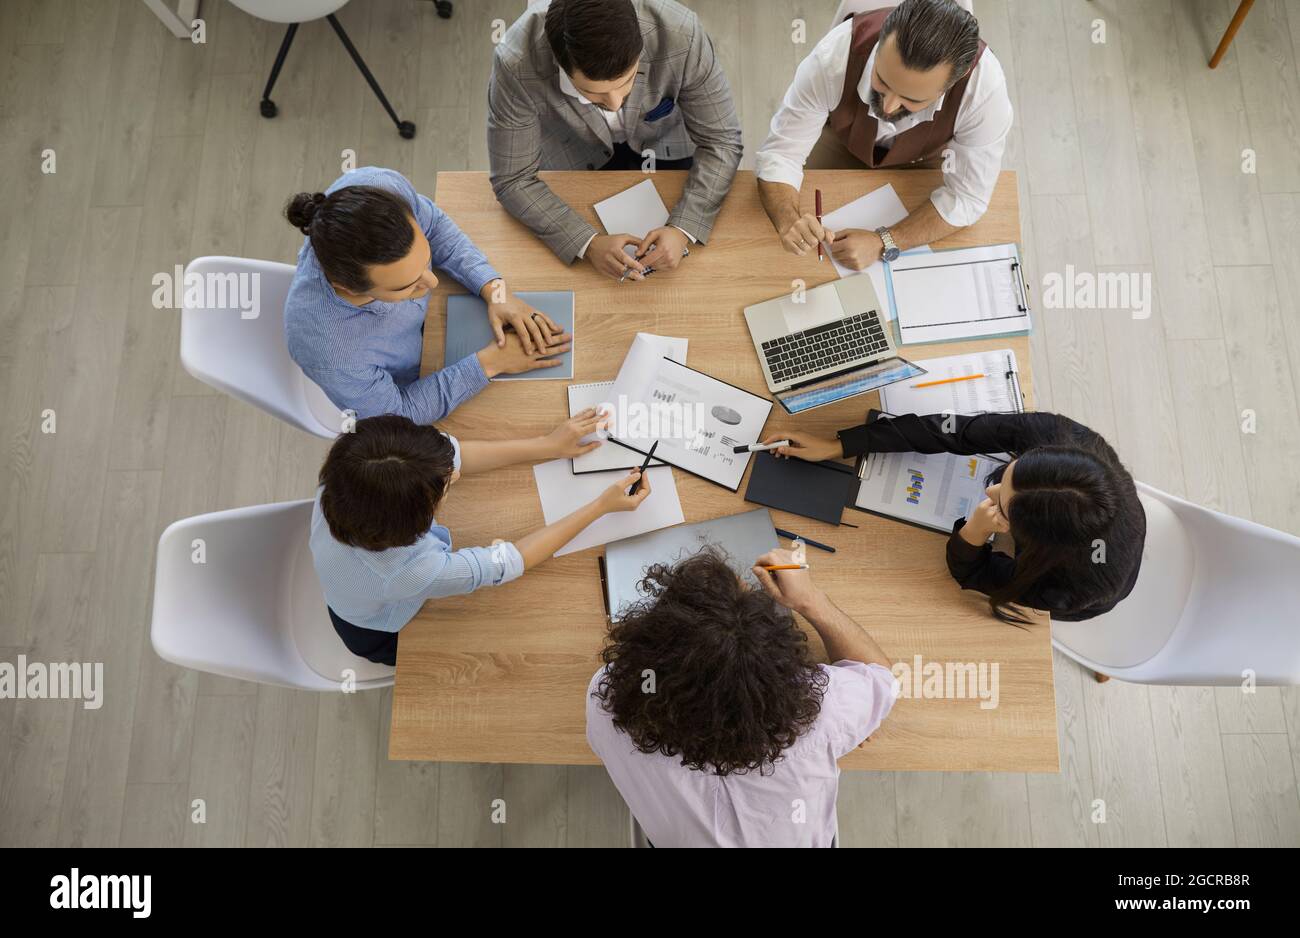 Top view of team of people having discussion during business meeting around office table Stock Photo